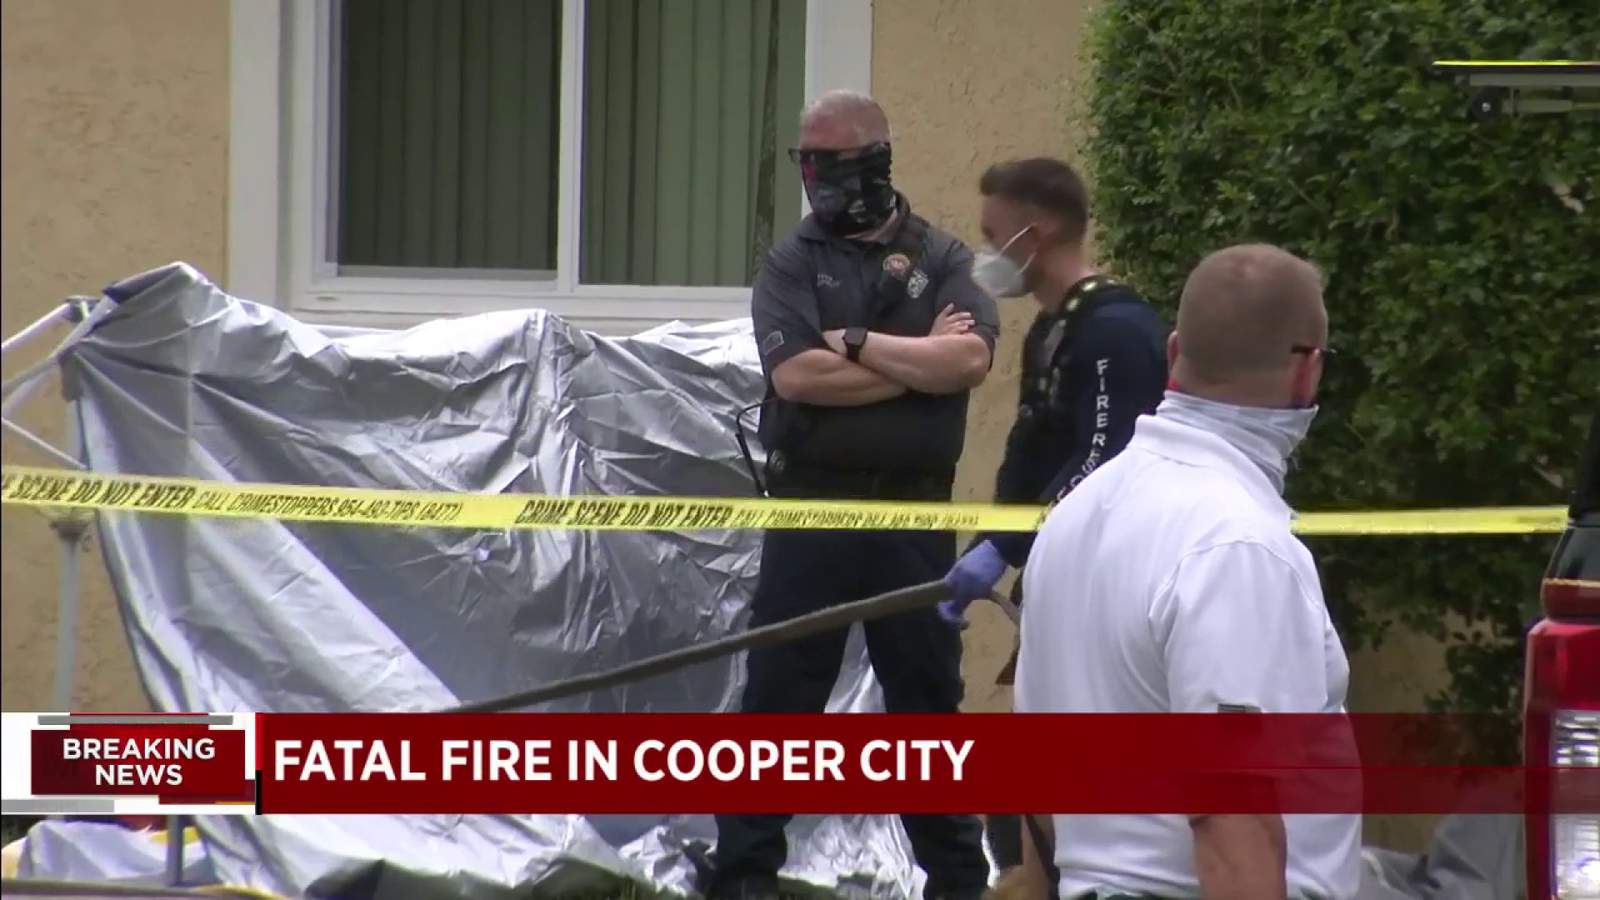 Retired Miami firefighter dies in Cooper City house fire, according to investigators